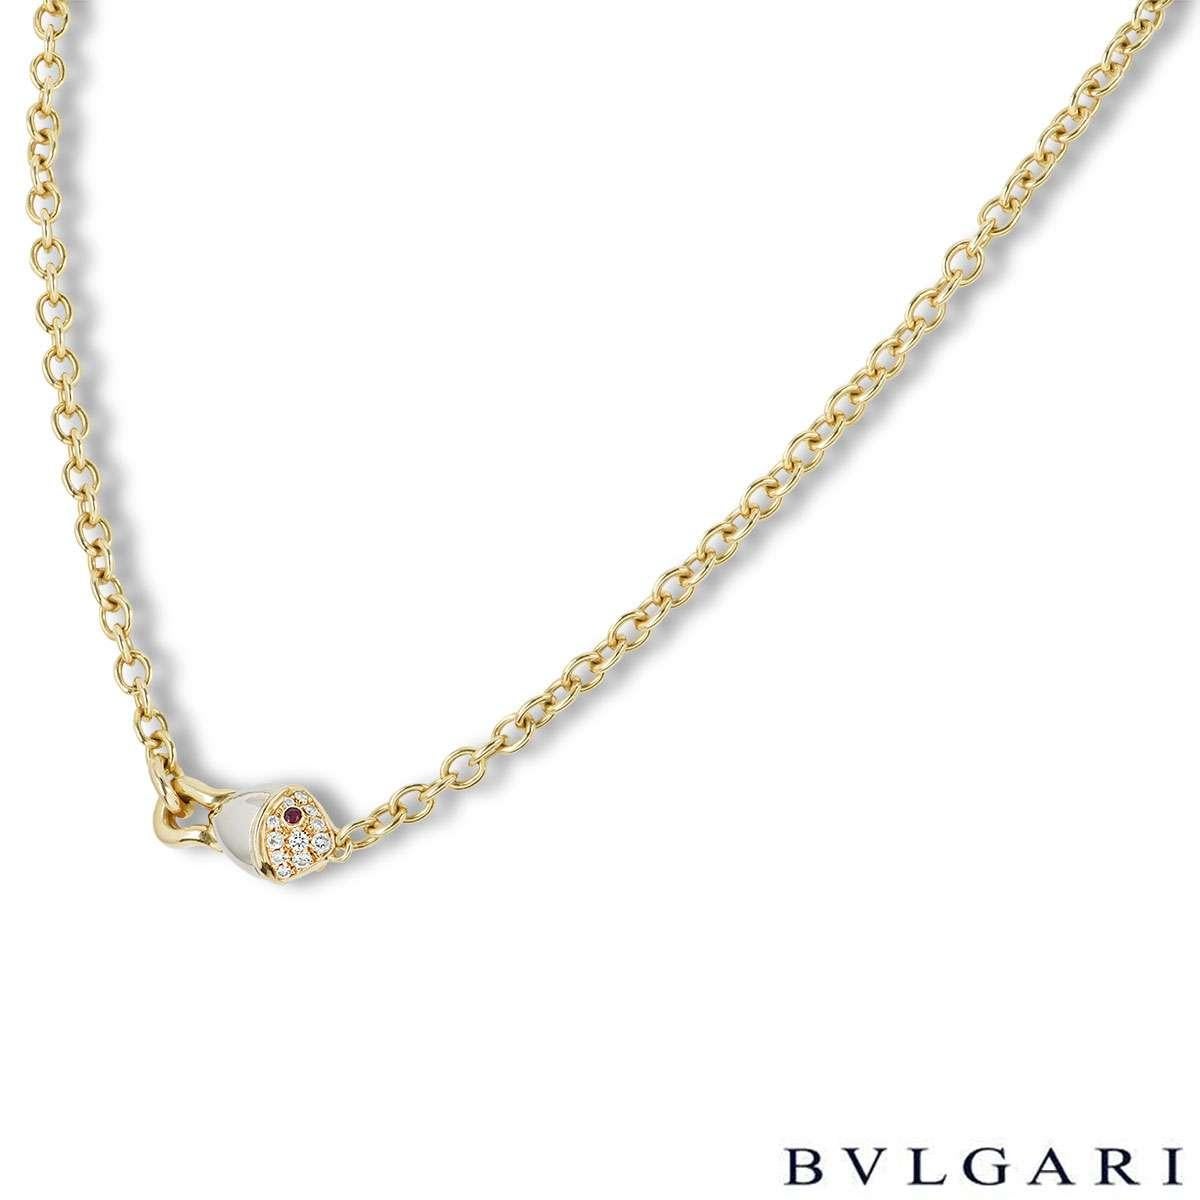 A unique diamond necklace from the Naturalia collection by Bvlgari. The necklace features a fish motif, with half of the body pave set with diamonds and the other half in polished white gold, complemented with a single ruby for the eye. The necklace